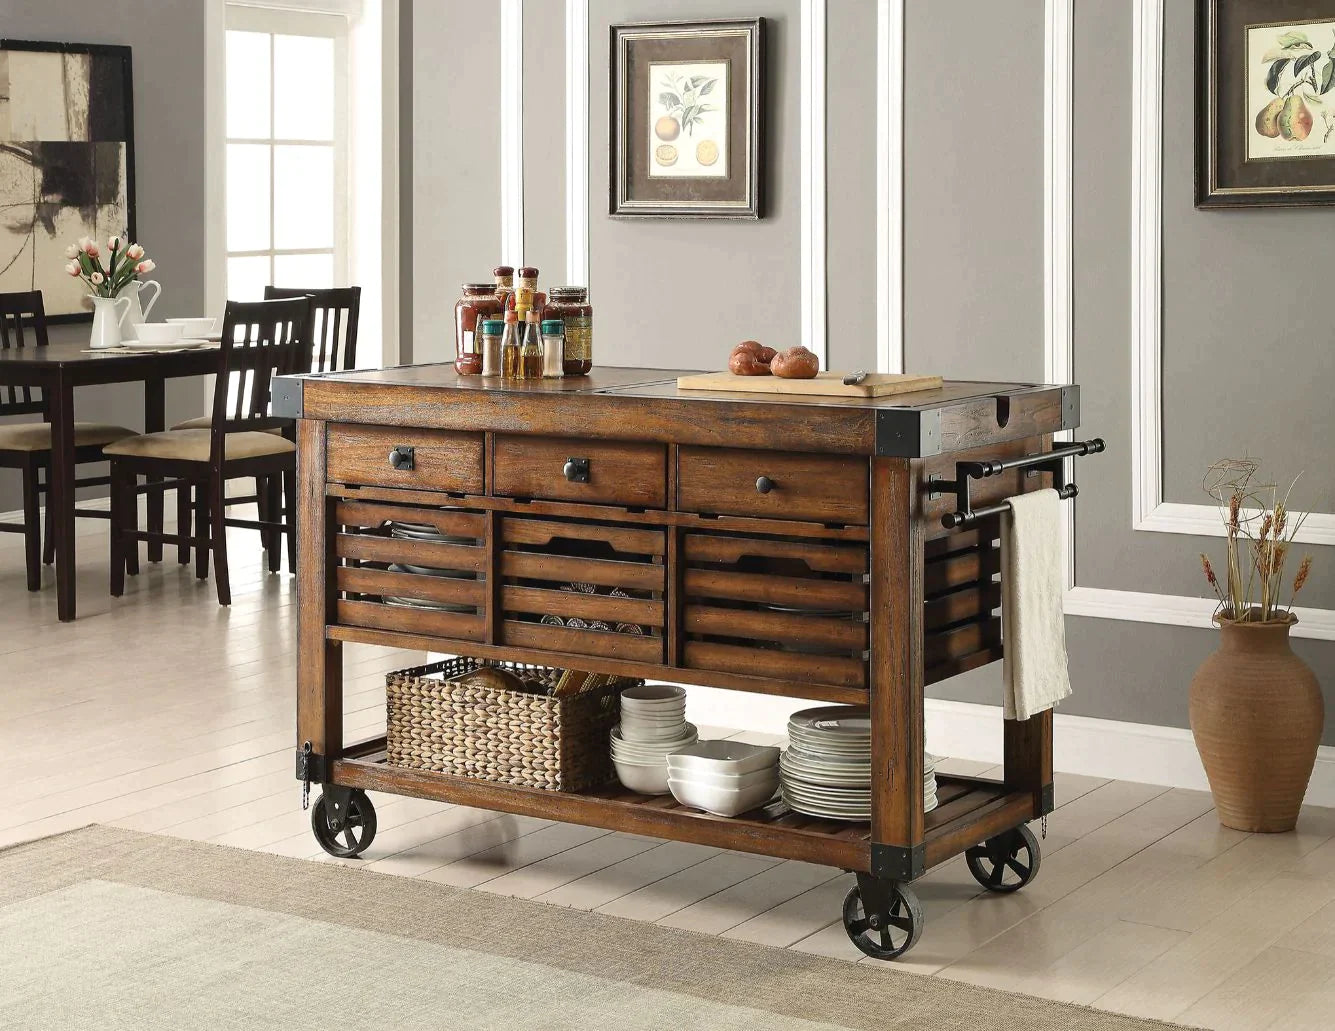 Kaif Distressed Chestnut Kitchen Cart Model 98184 By ACME Furniture